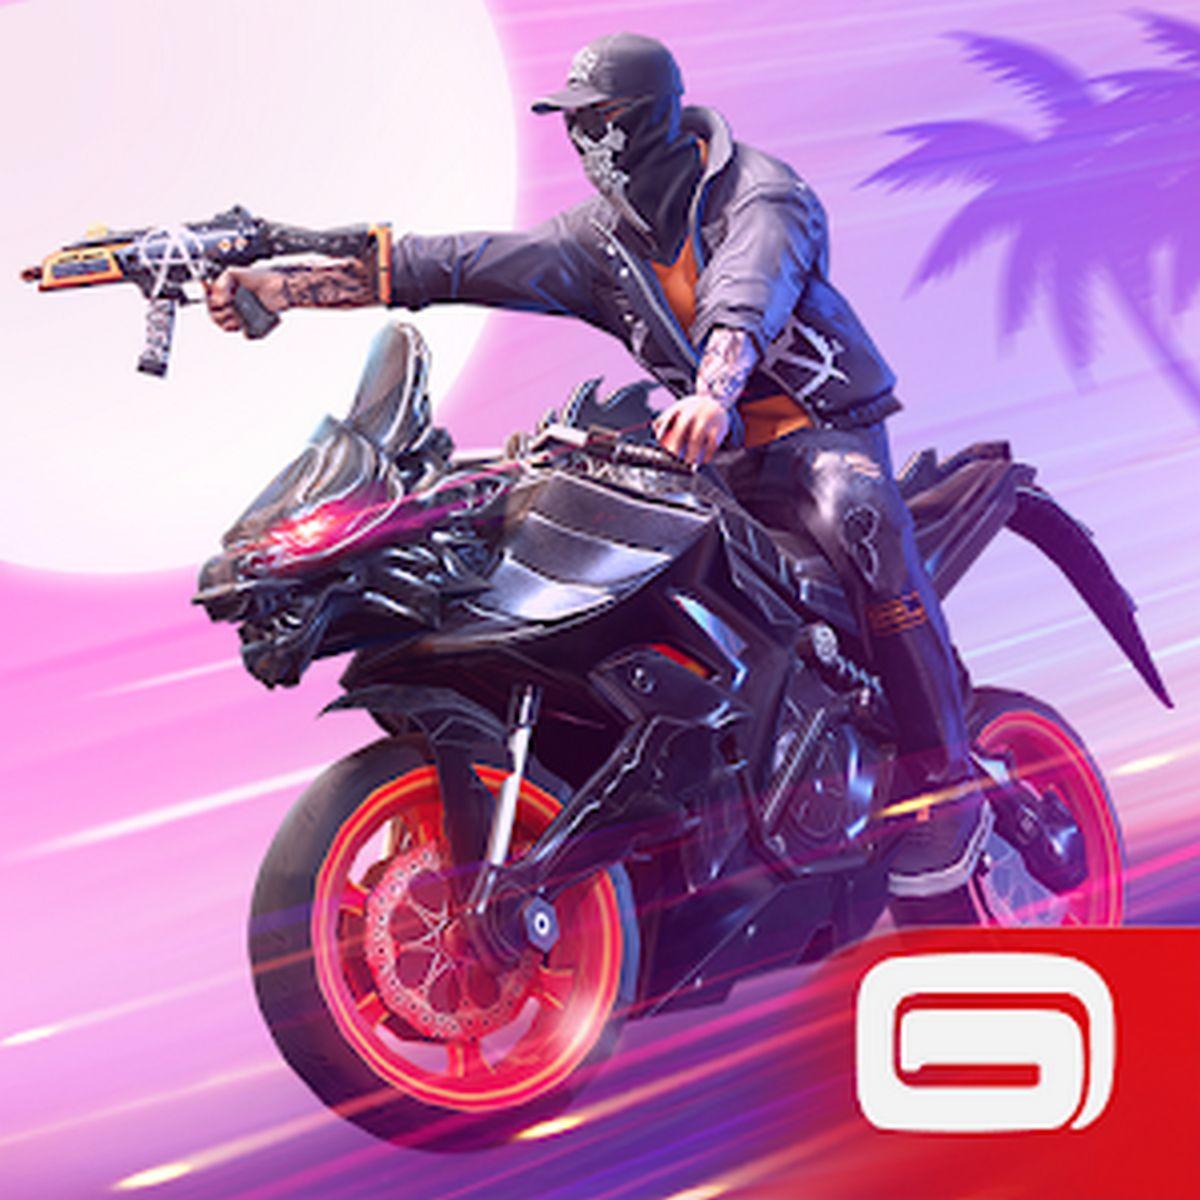 Download Gta 5 For Android Full Apk